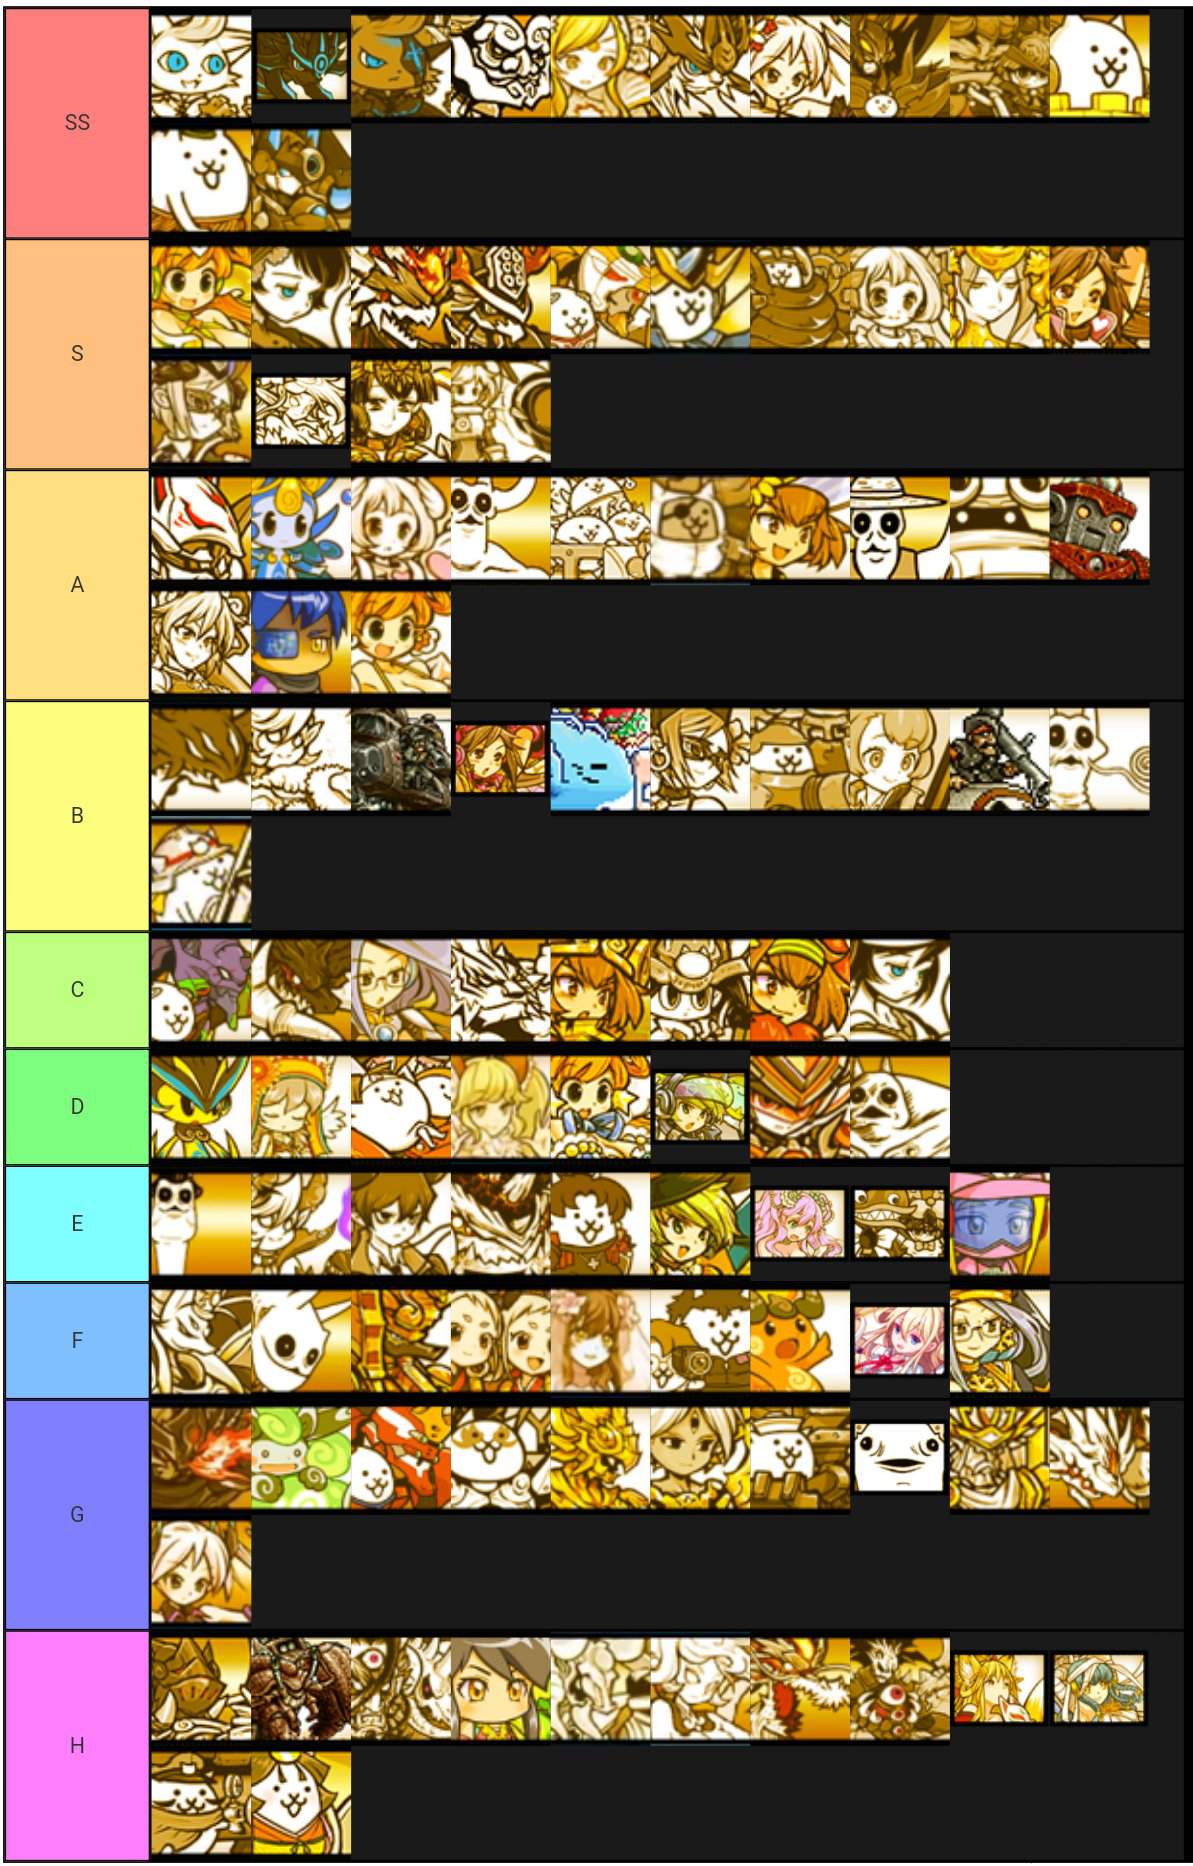 Cats I Made A Super Rare Tierlist Hopefully It Isn T Too Wrong If A Cat Is Missing I Don T Have It Or I Wasn T Bothered To Add It Battlecats